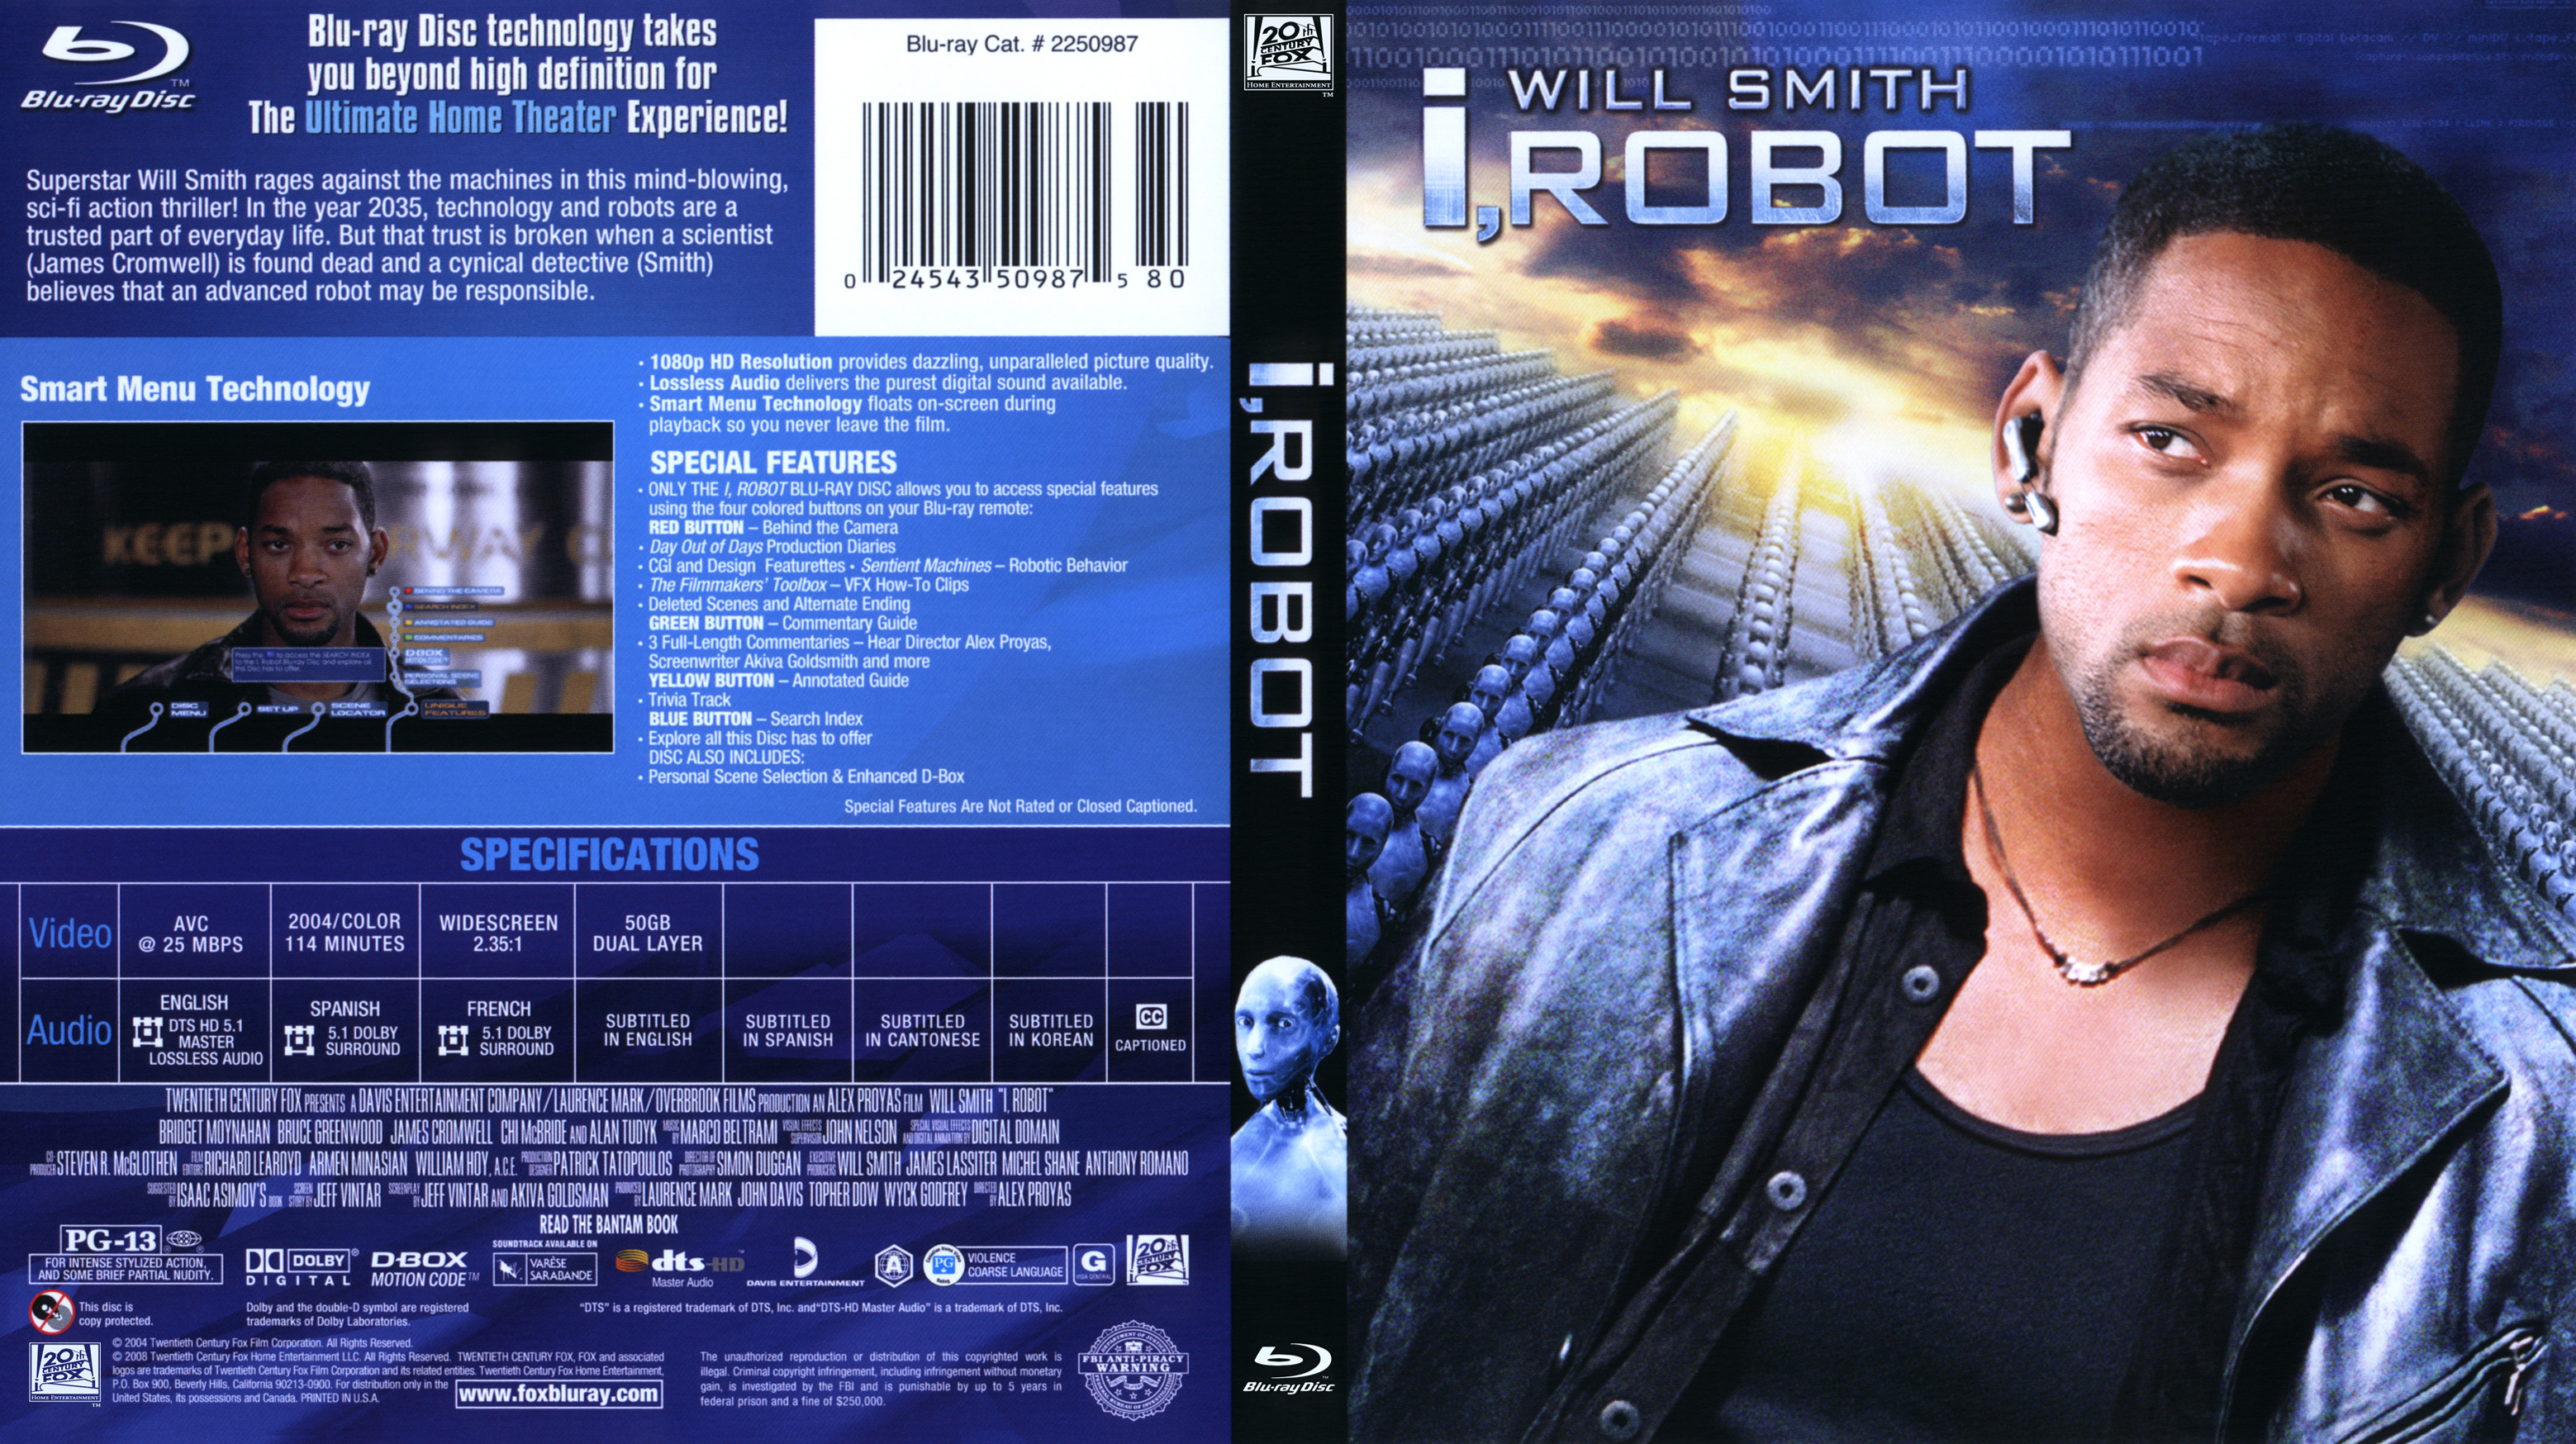 I Robot Blu Ray Dvd Covers Cover Century Over 500 000 Album Art Covers For Free